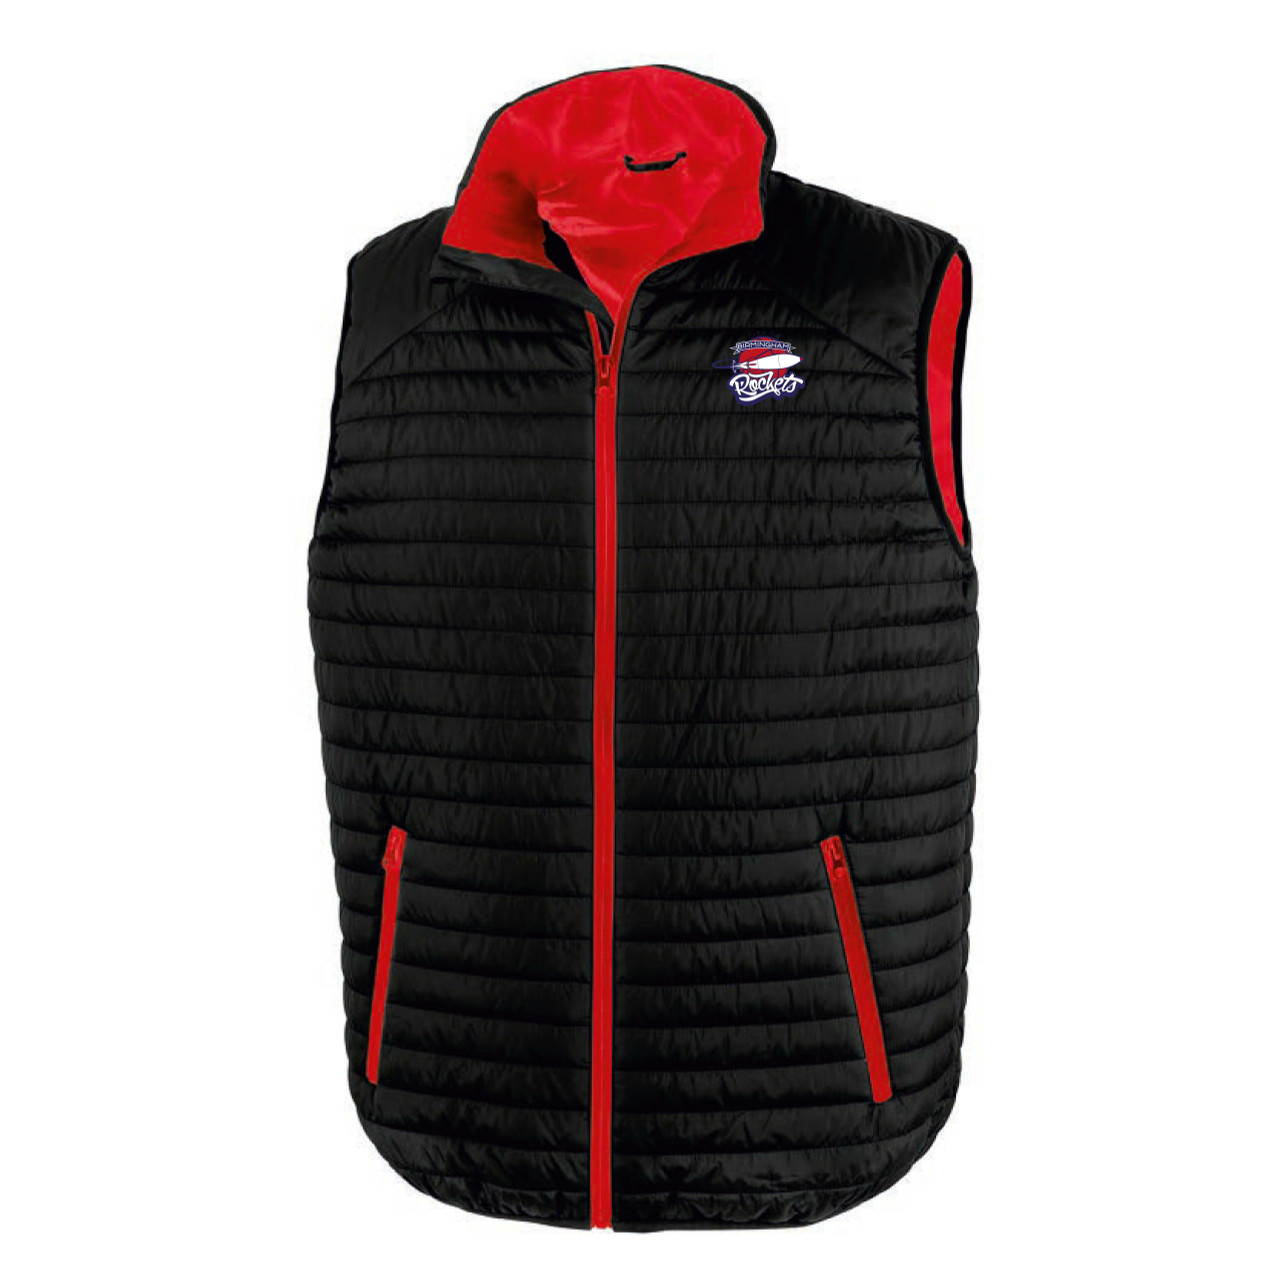 COB Rockets - Adult Black Thermo Gilet - Speed One Sports